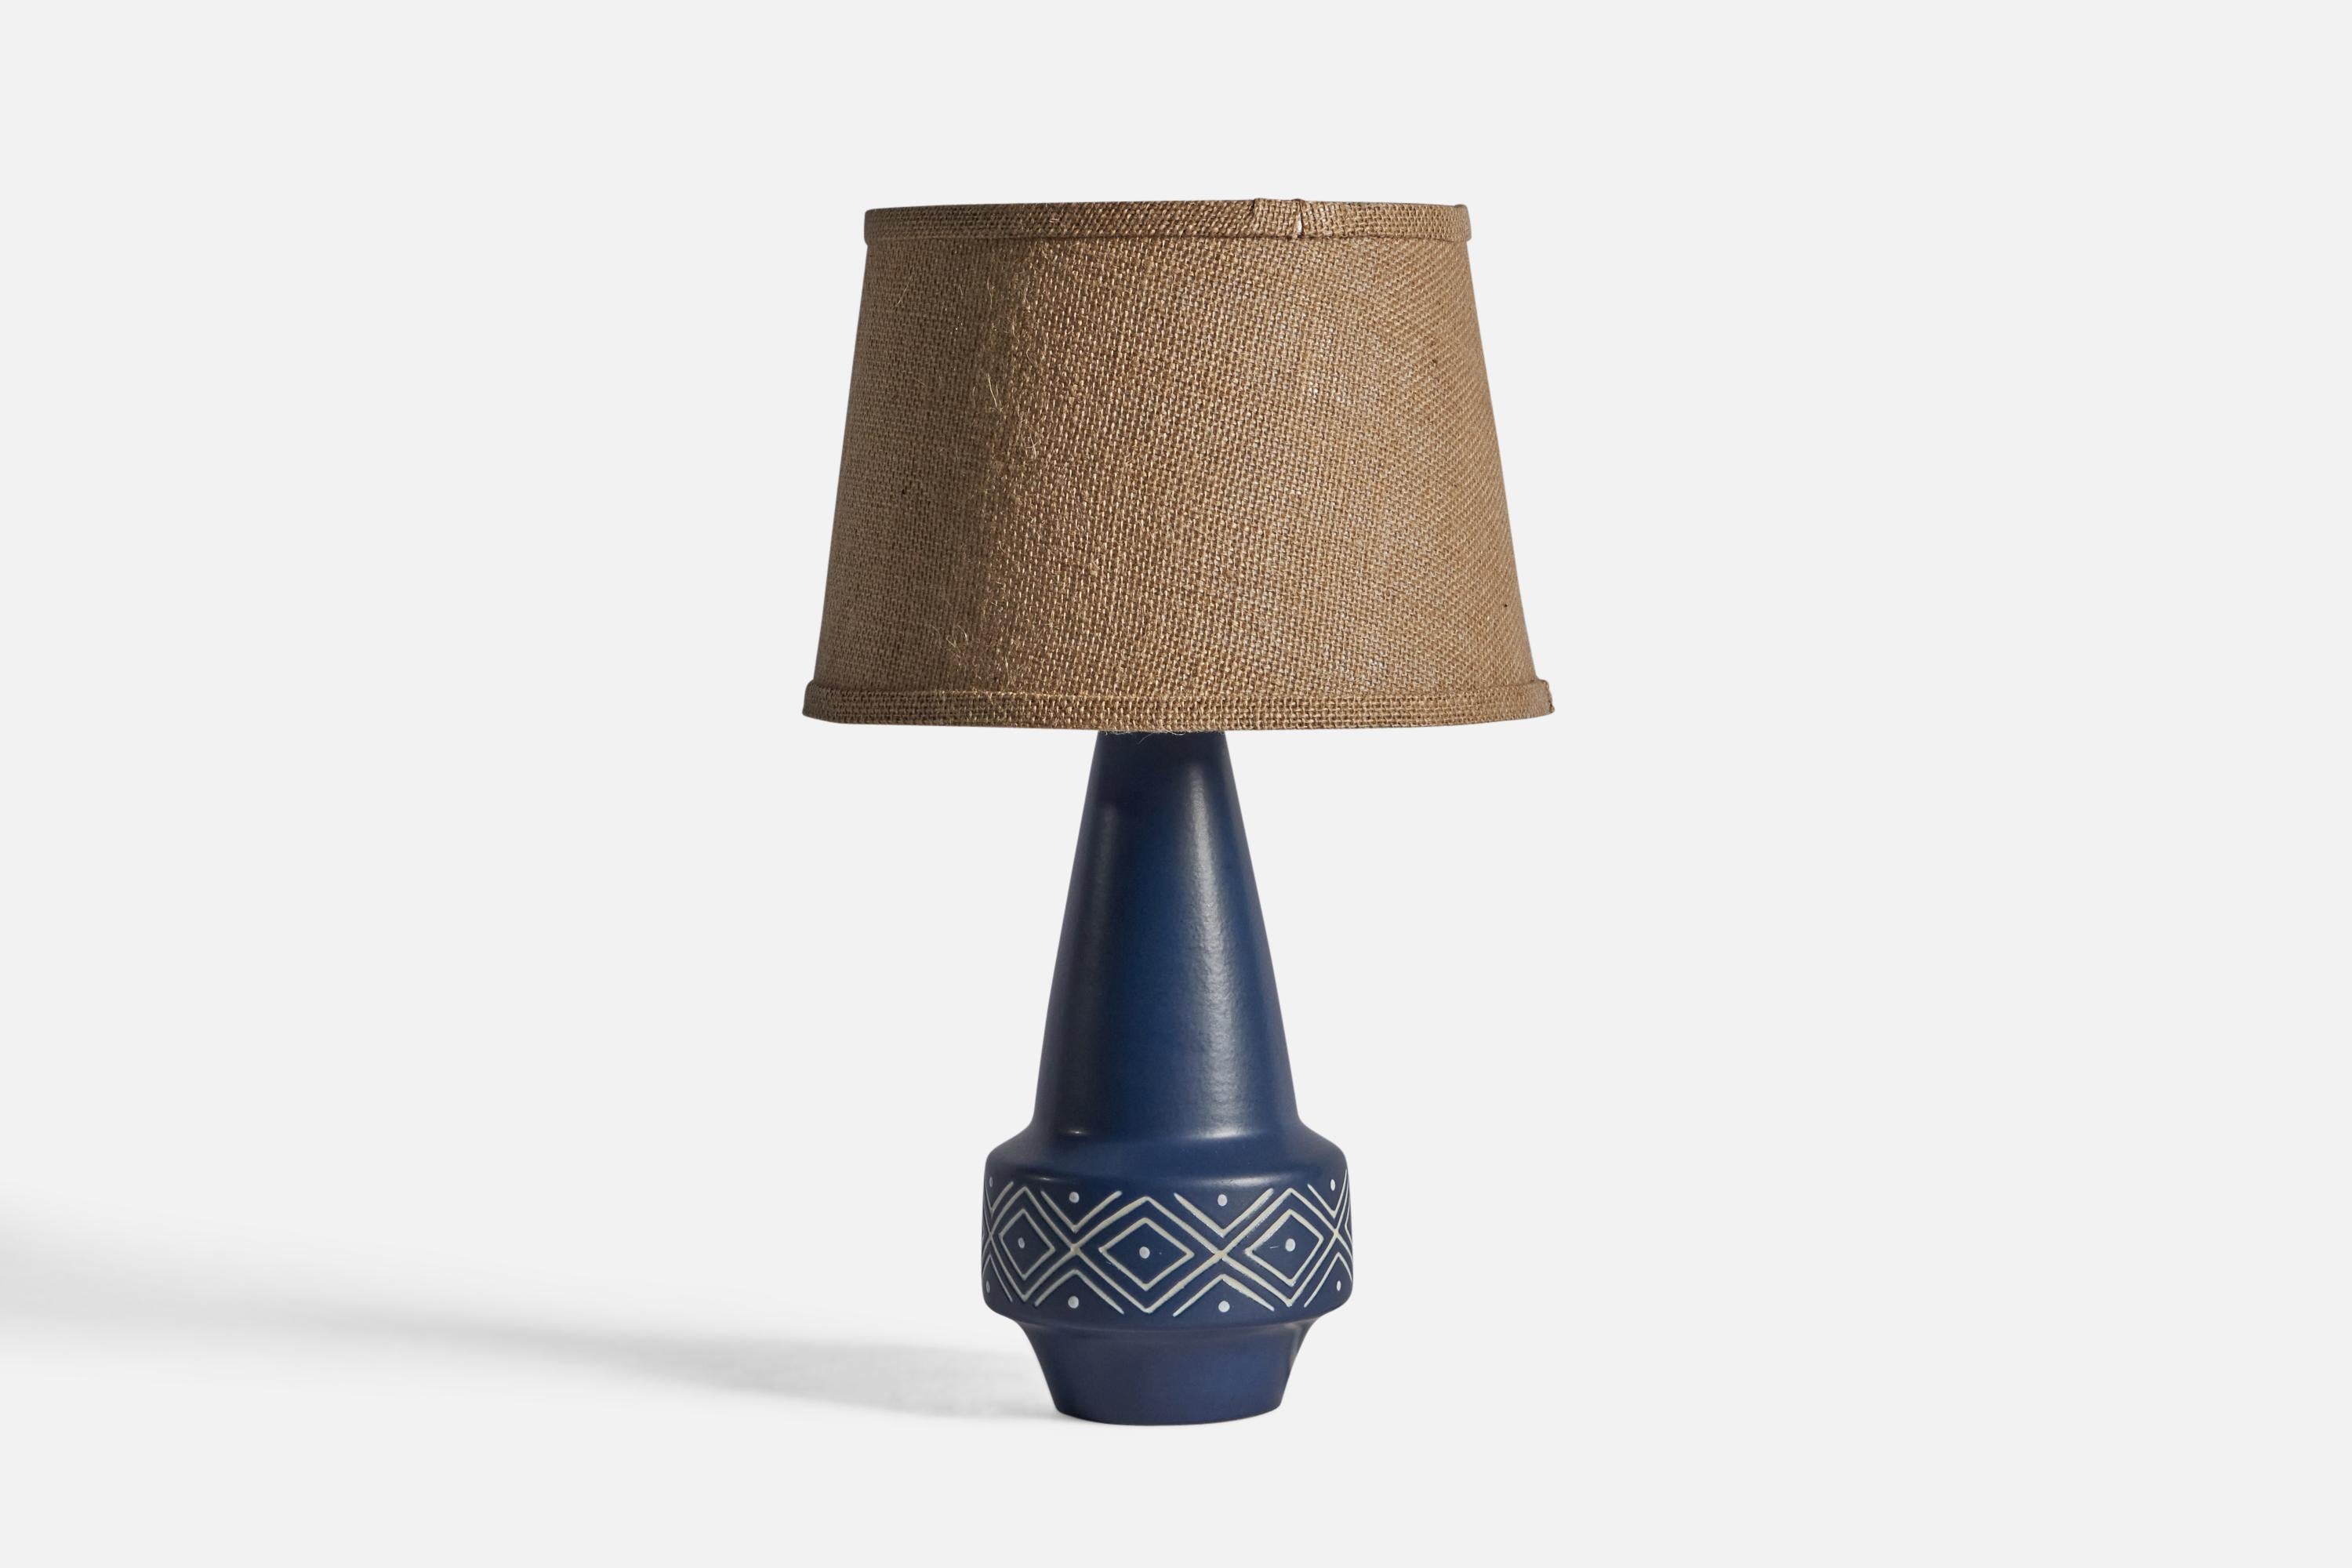 A blue-glazed table lamp designed and produced by Søholm, Bornholm, Denmark, c. 1960s.

Dimensions of Lamp (inches): 13.25